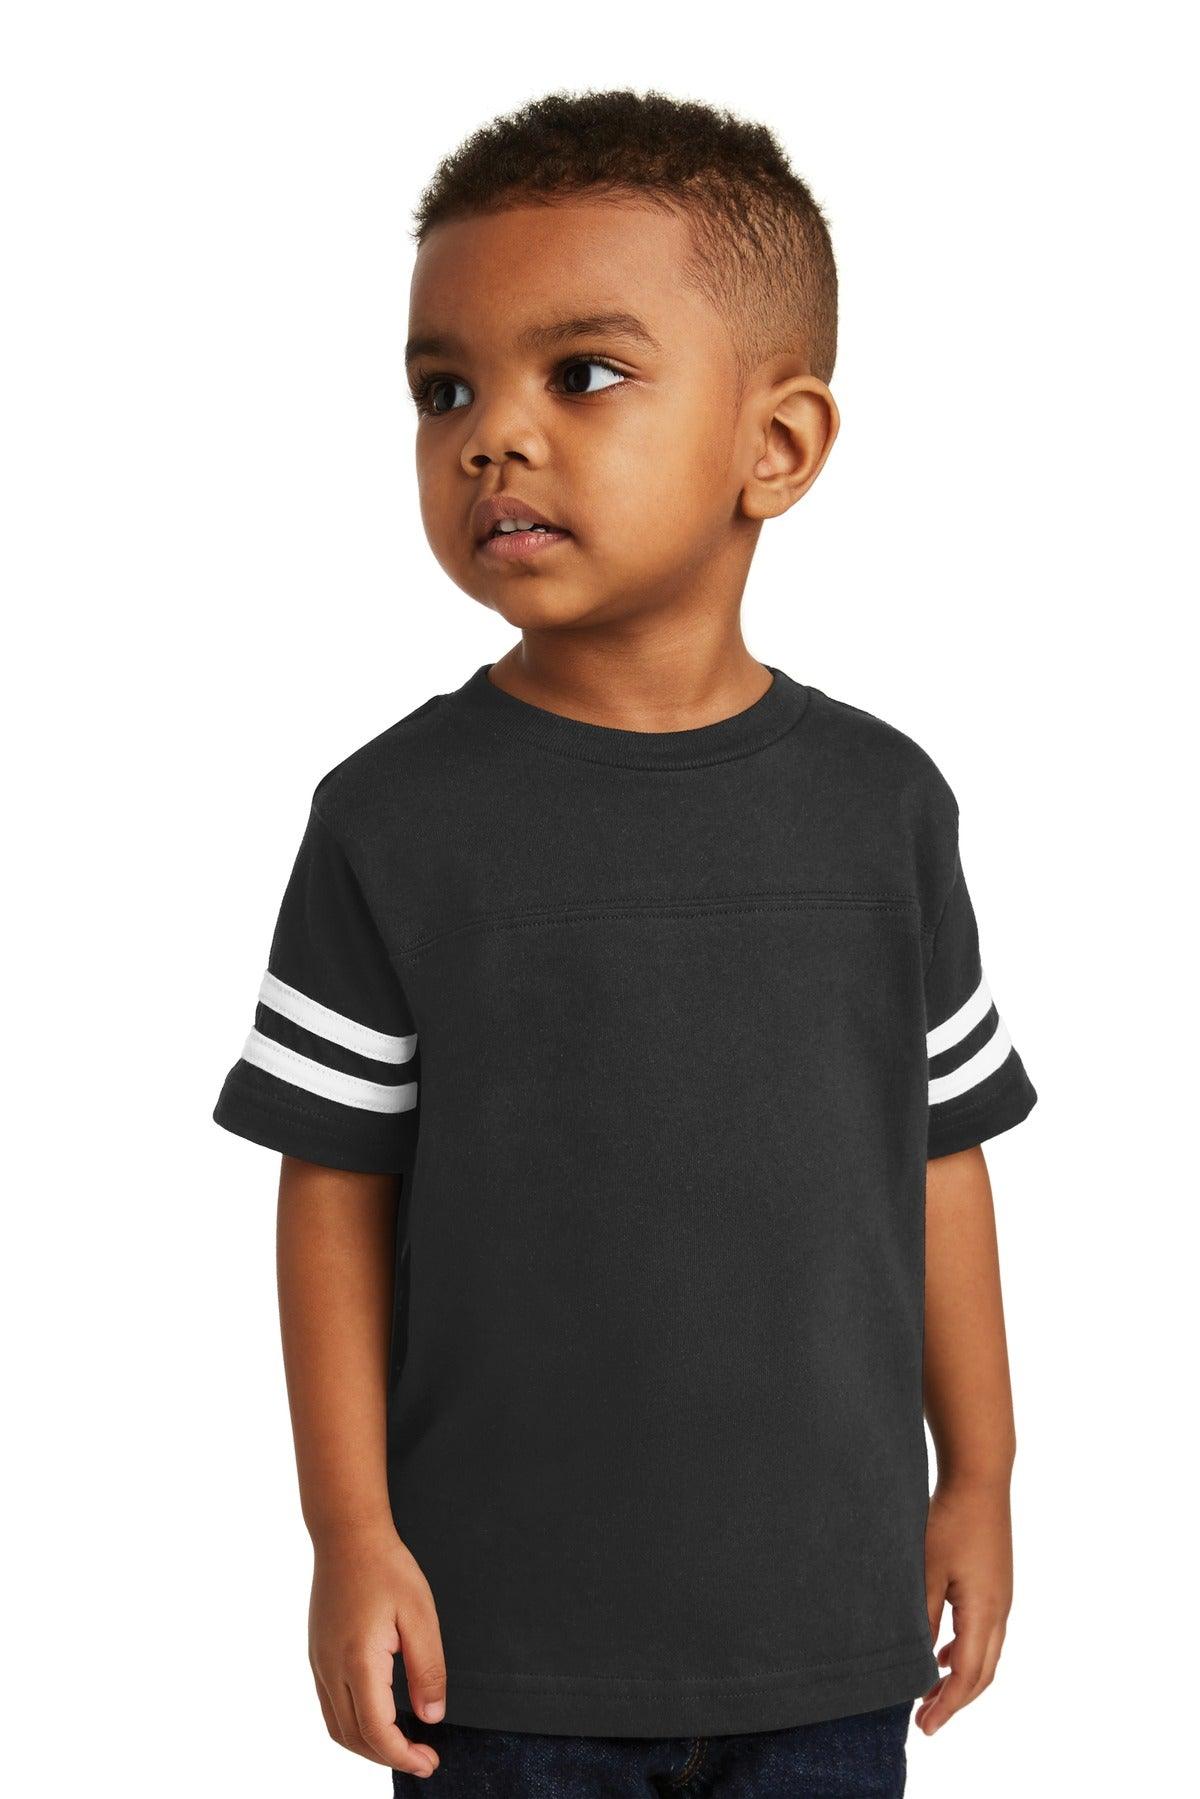 Rabbit Skins Toddler Football Fine Jersey Tee. RS3037 - Dresses Max